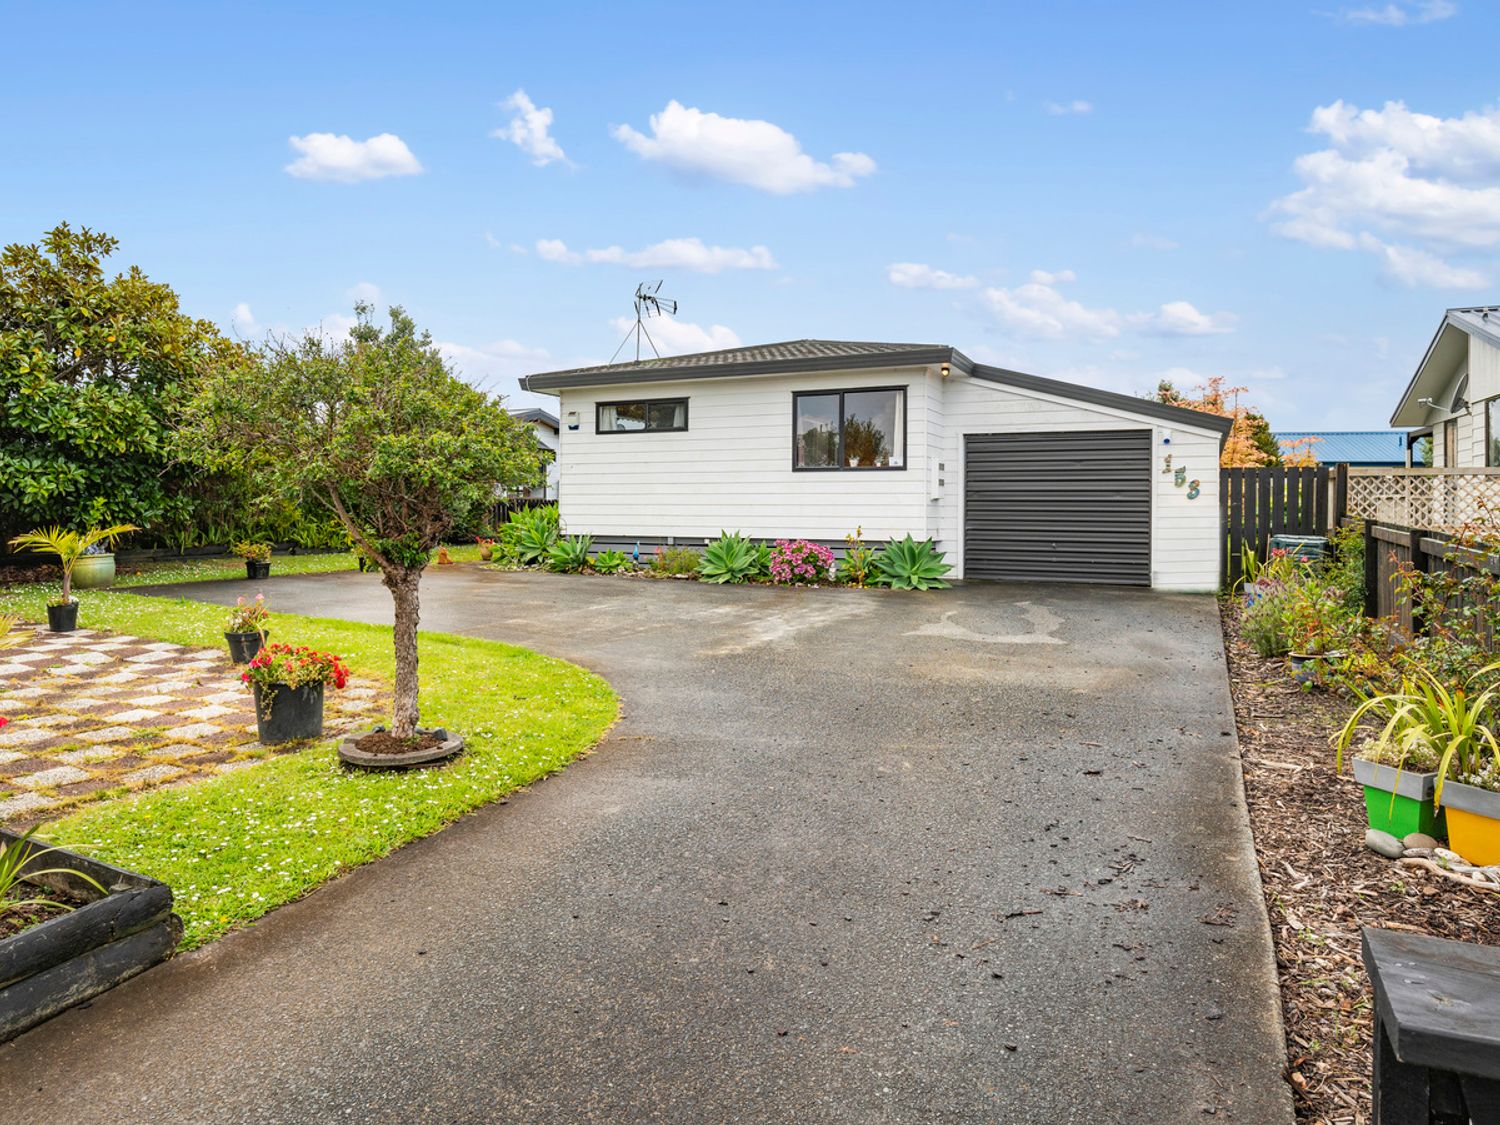 Roseville - Snells Beach Holiday Home -  - 1122592 - photo 1